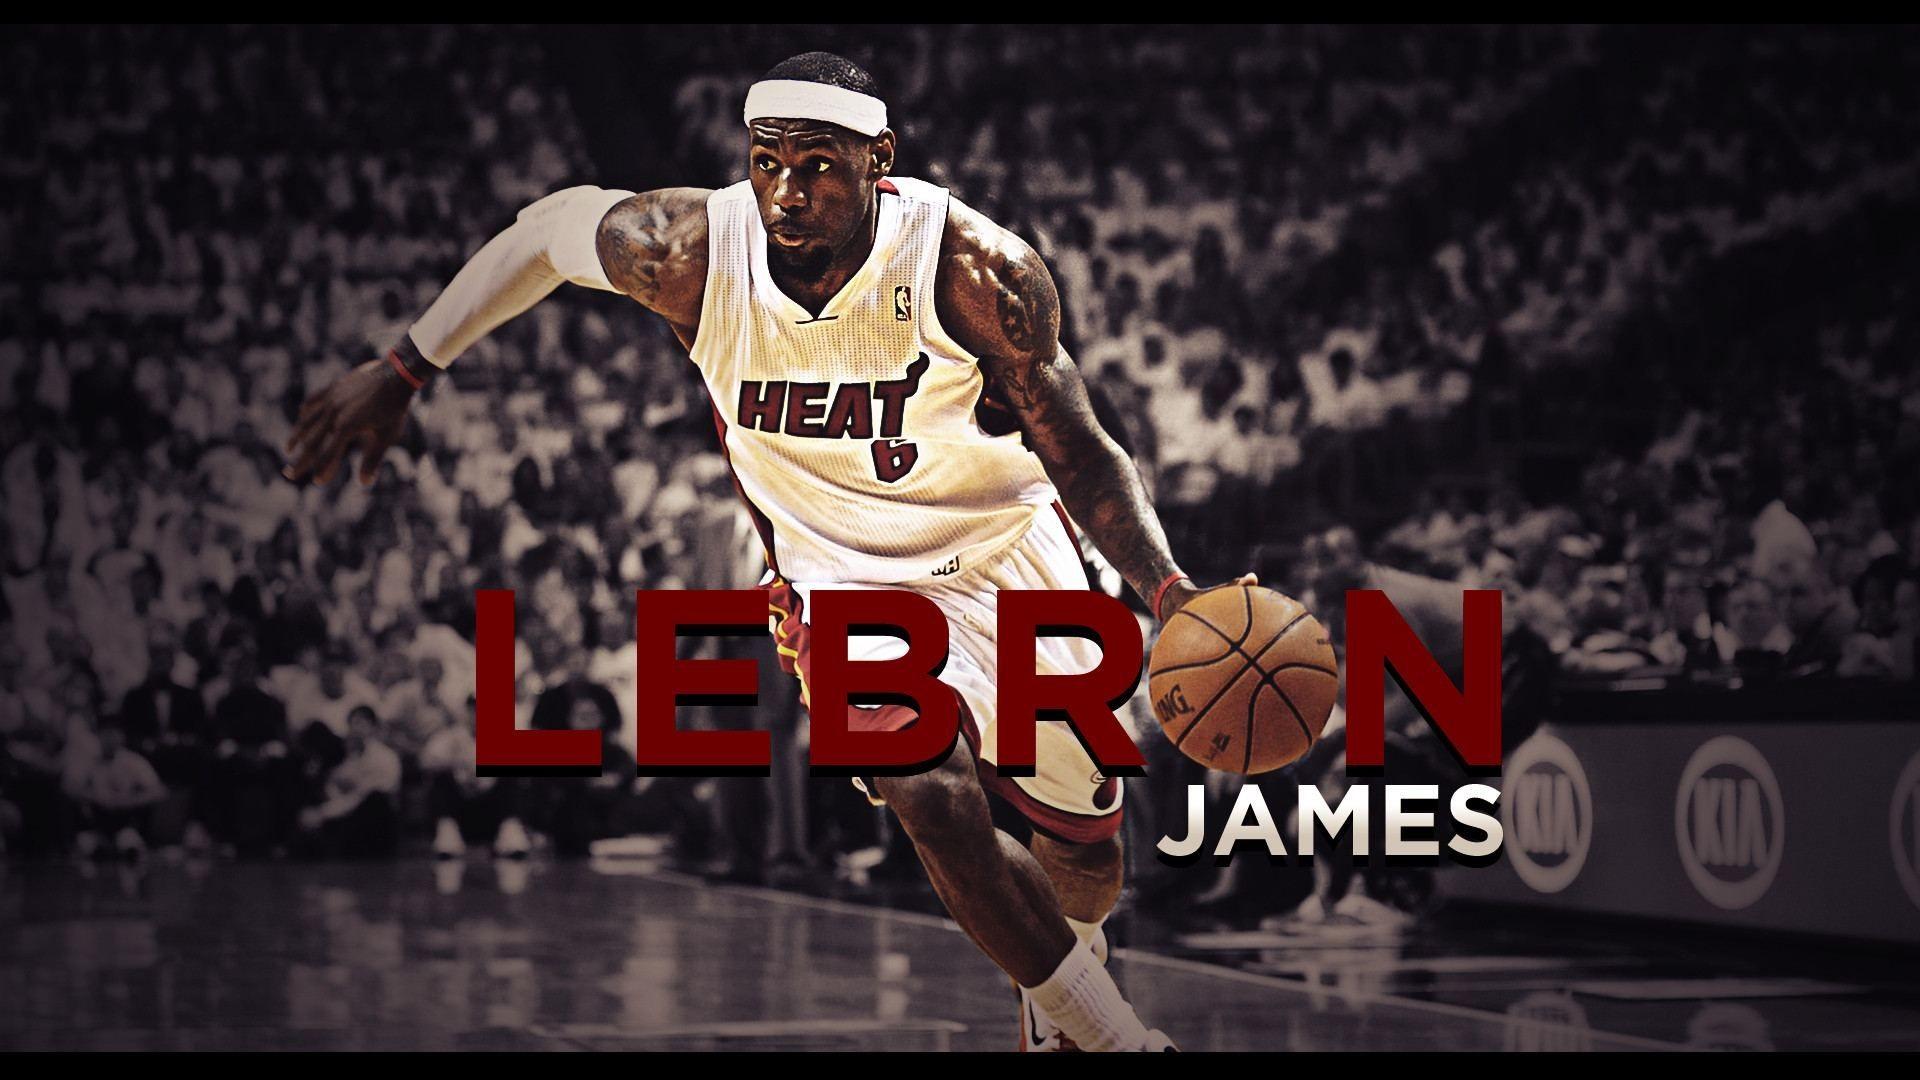 Lebron James Wallpaper HD Heat background picture